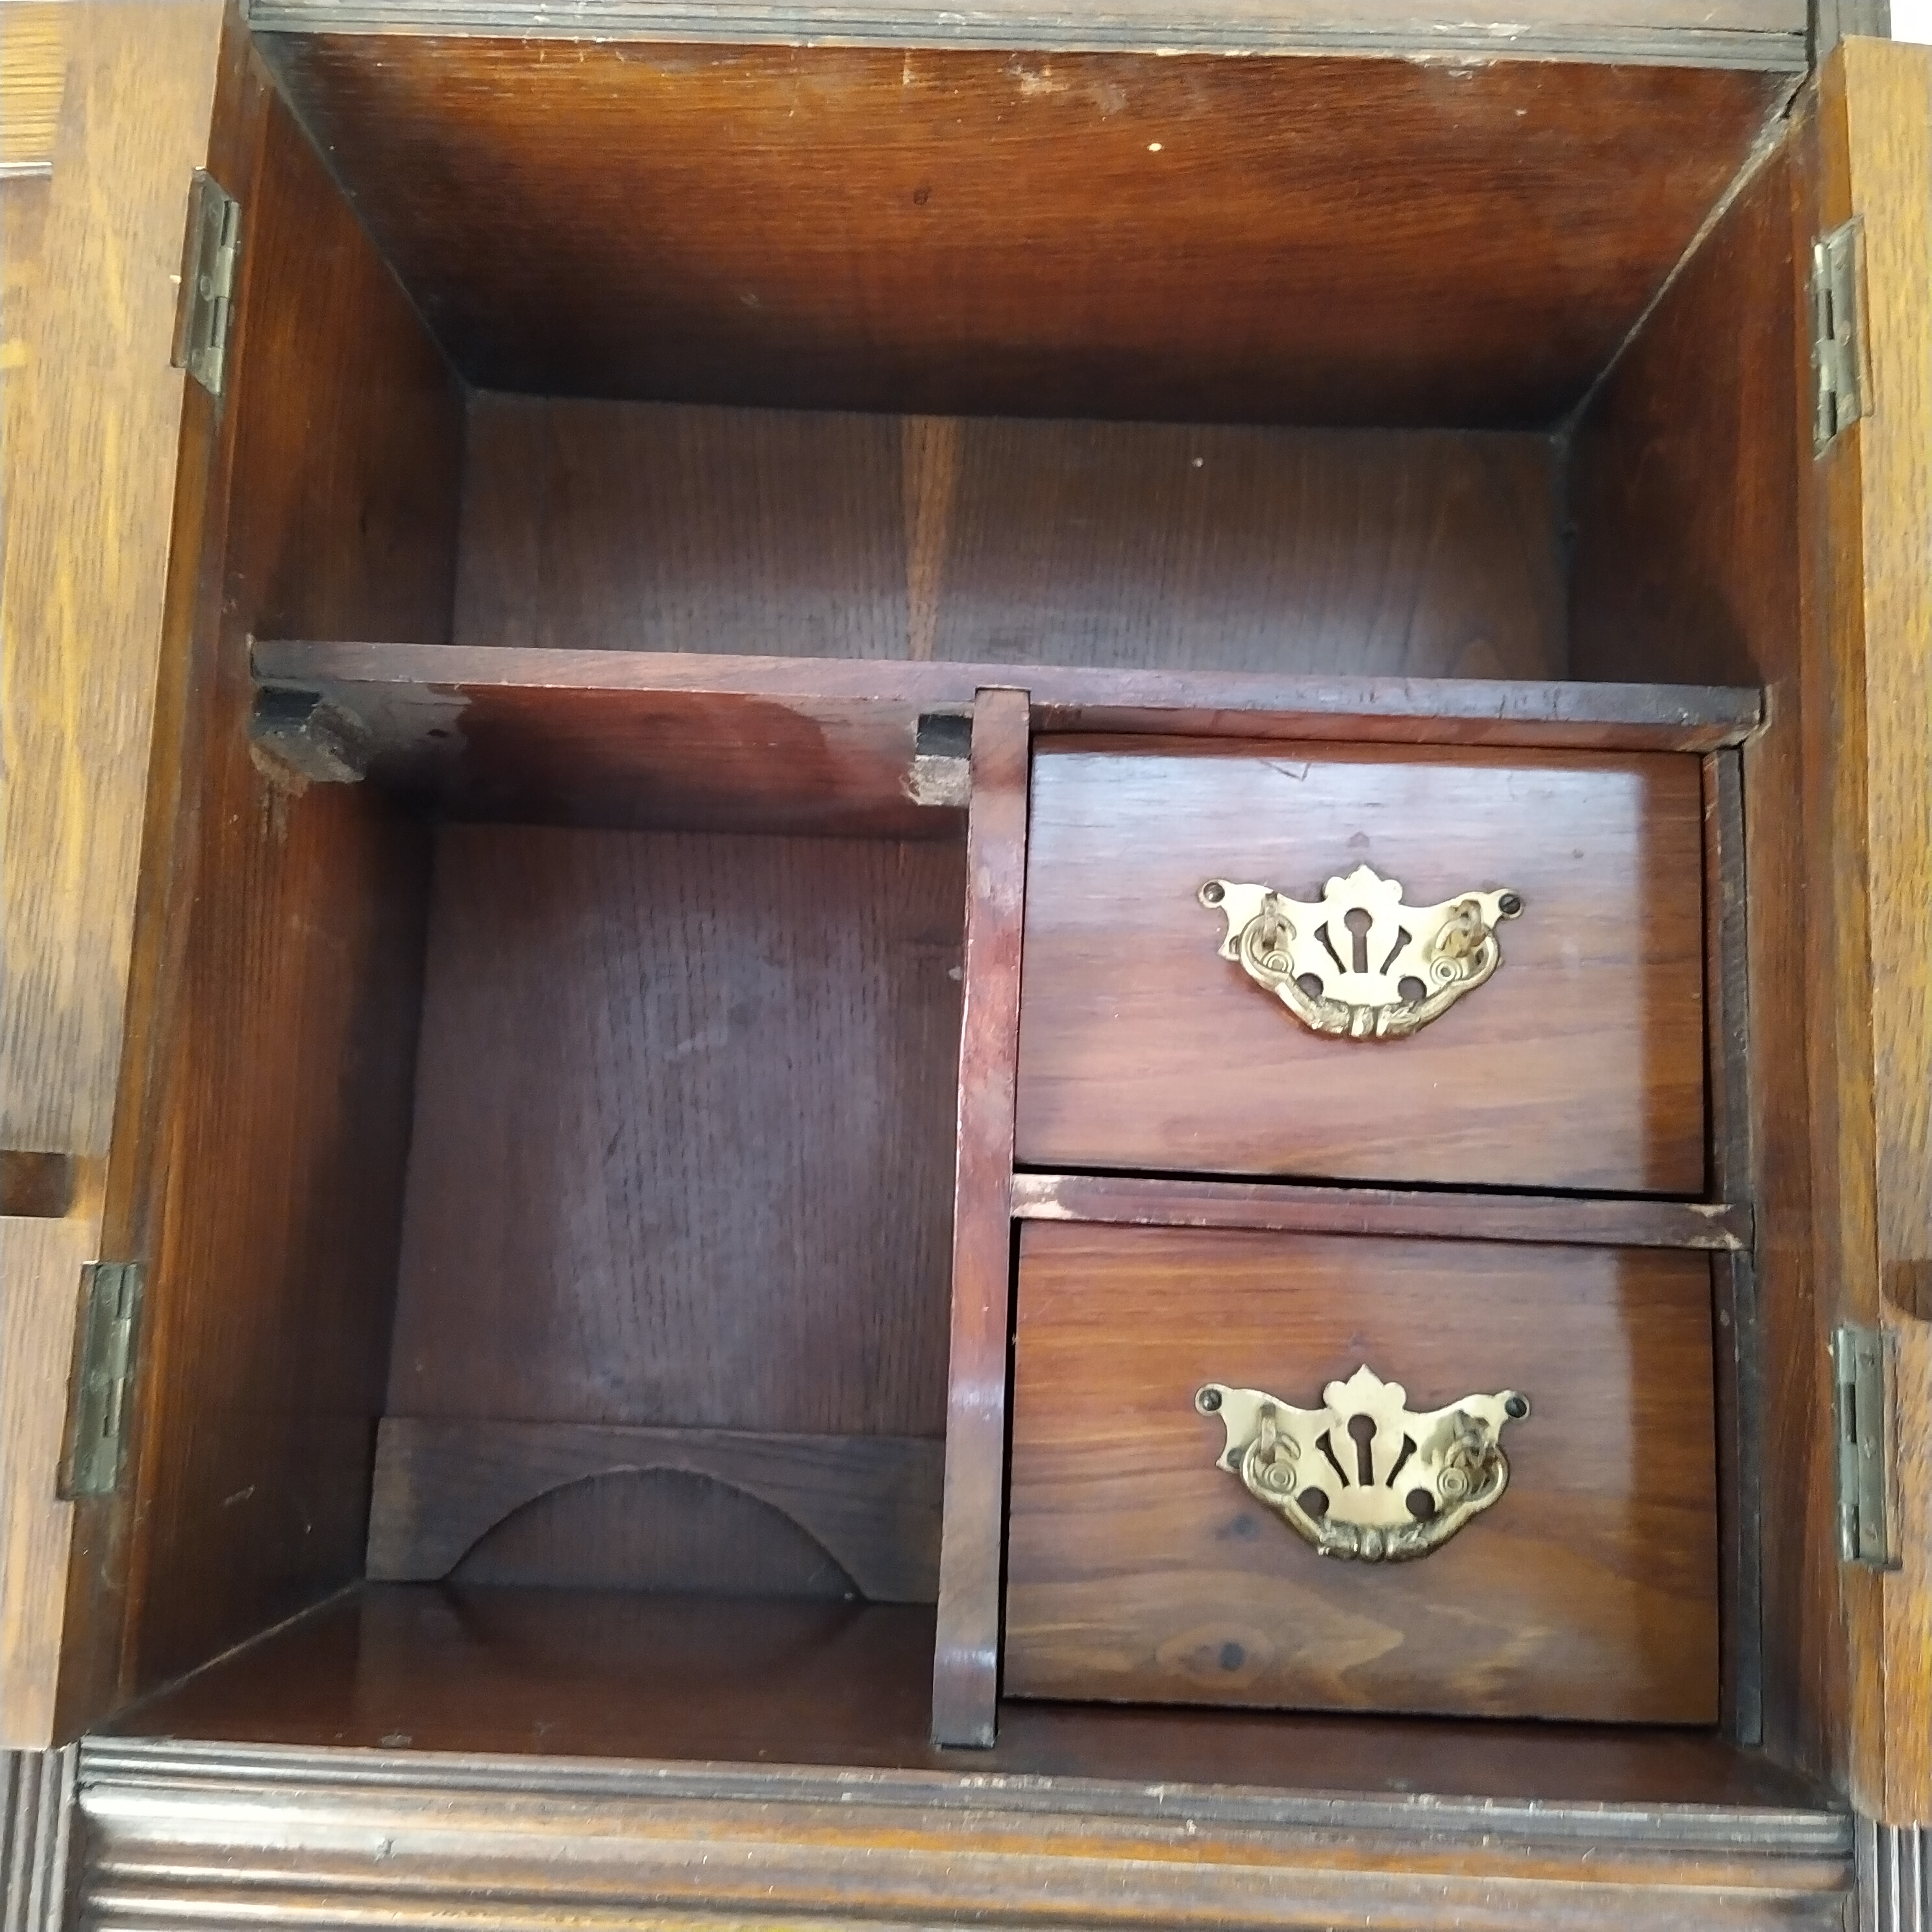 An Edwardian oak cased smokers wall cabinet with contents including two cased Meerschaum pipes - Image 2 of 3